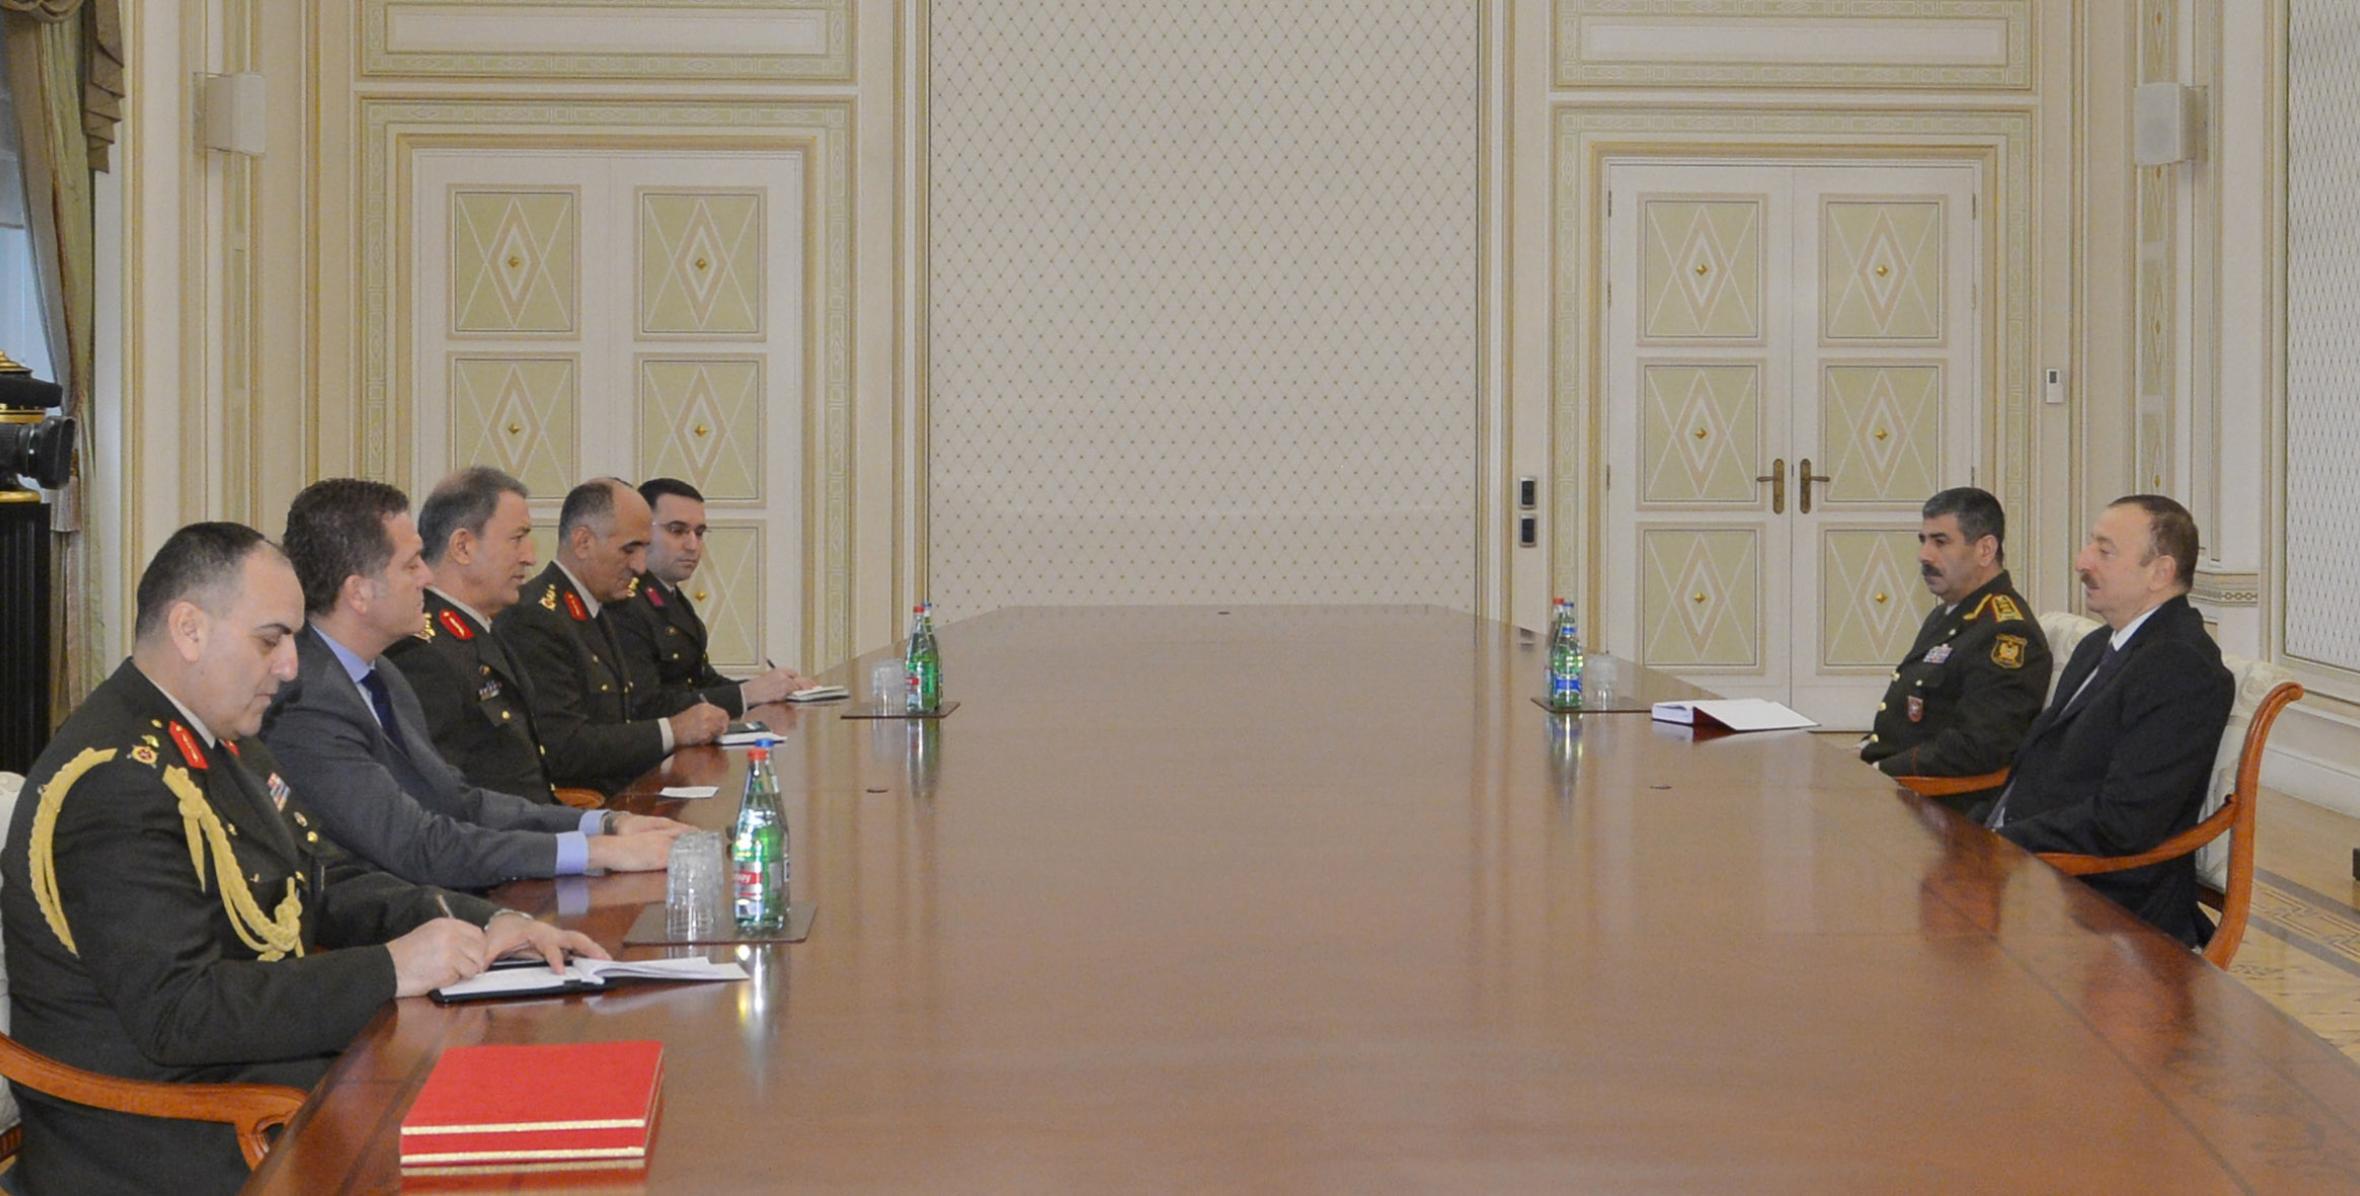 Ilham Aliyev received a delegation led by the commander of the Ground Forces of Turkey